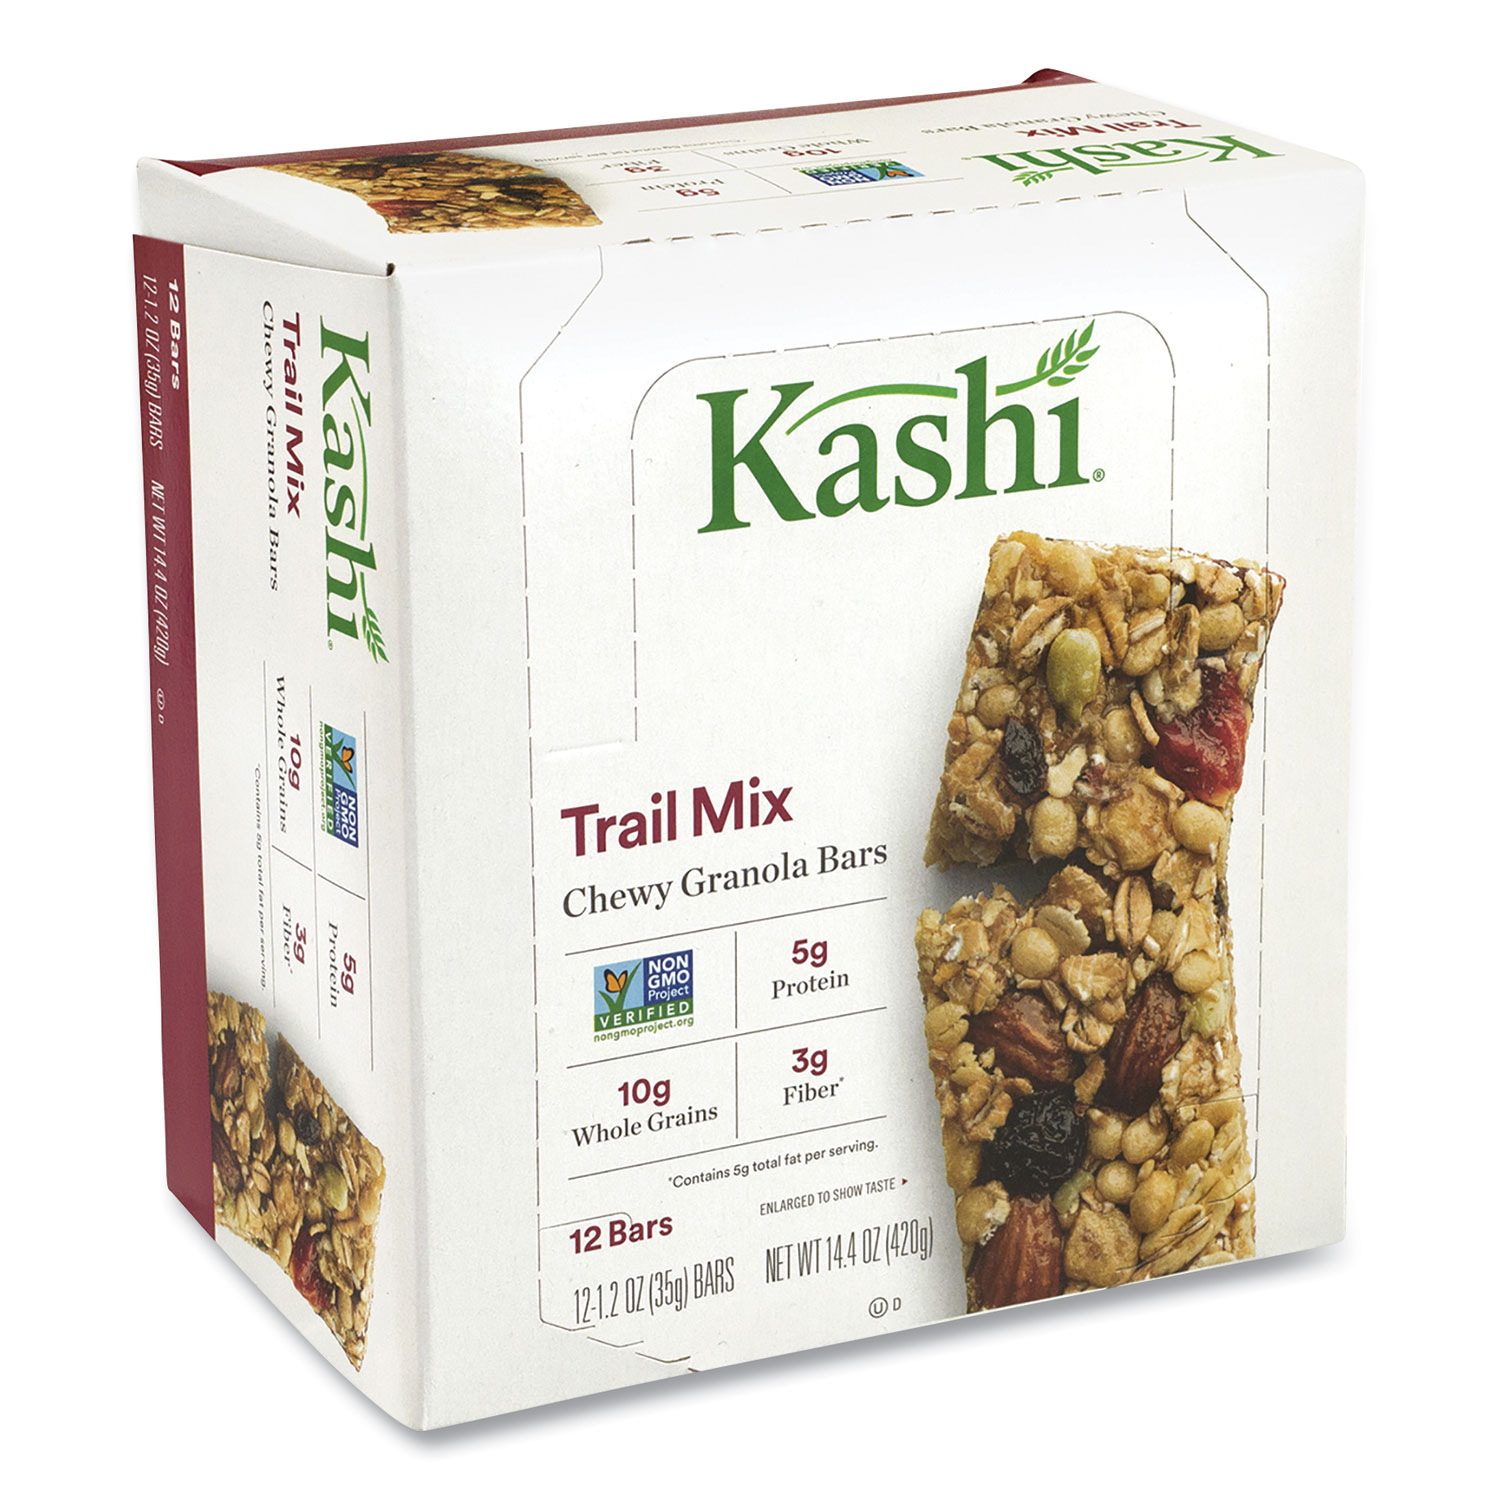 Kashi® Chewy Granola Bars, Trail Mix, 1.2 oz Bar, 12 Bars/Box, 2 Boxes/Pack, Free Delivery in 1-4 Business Days